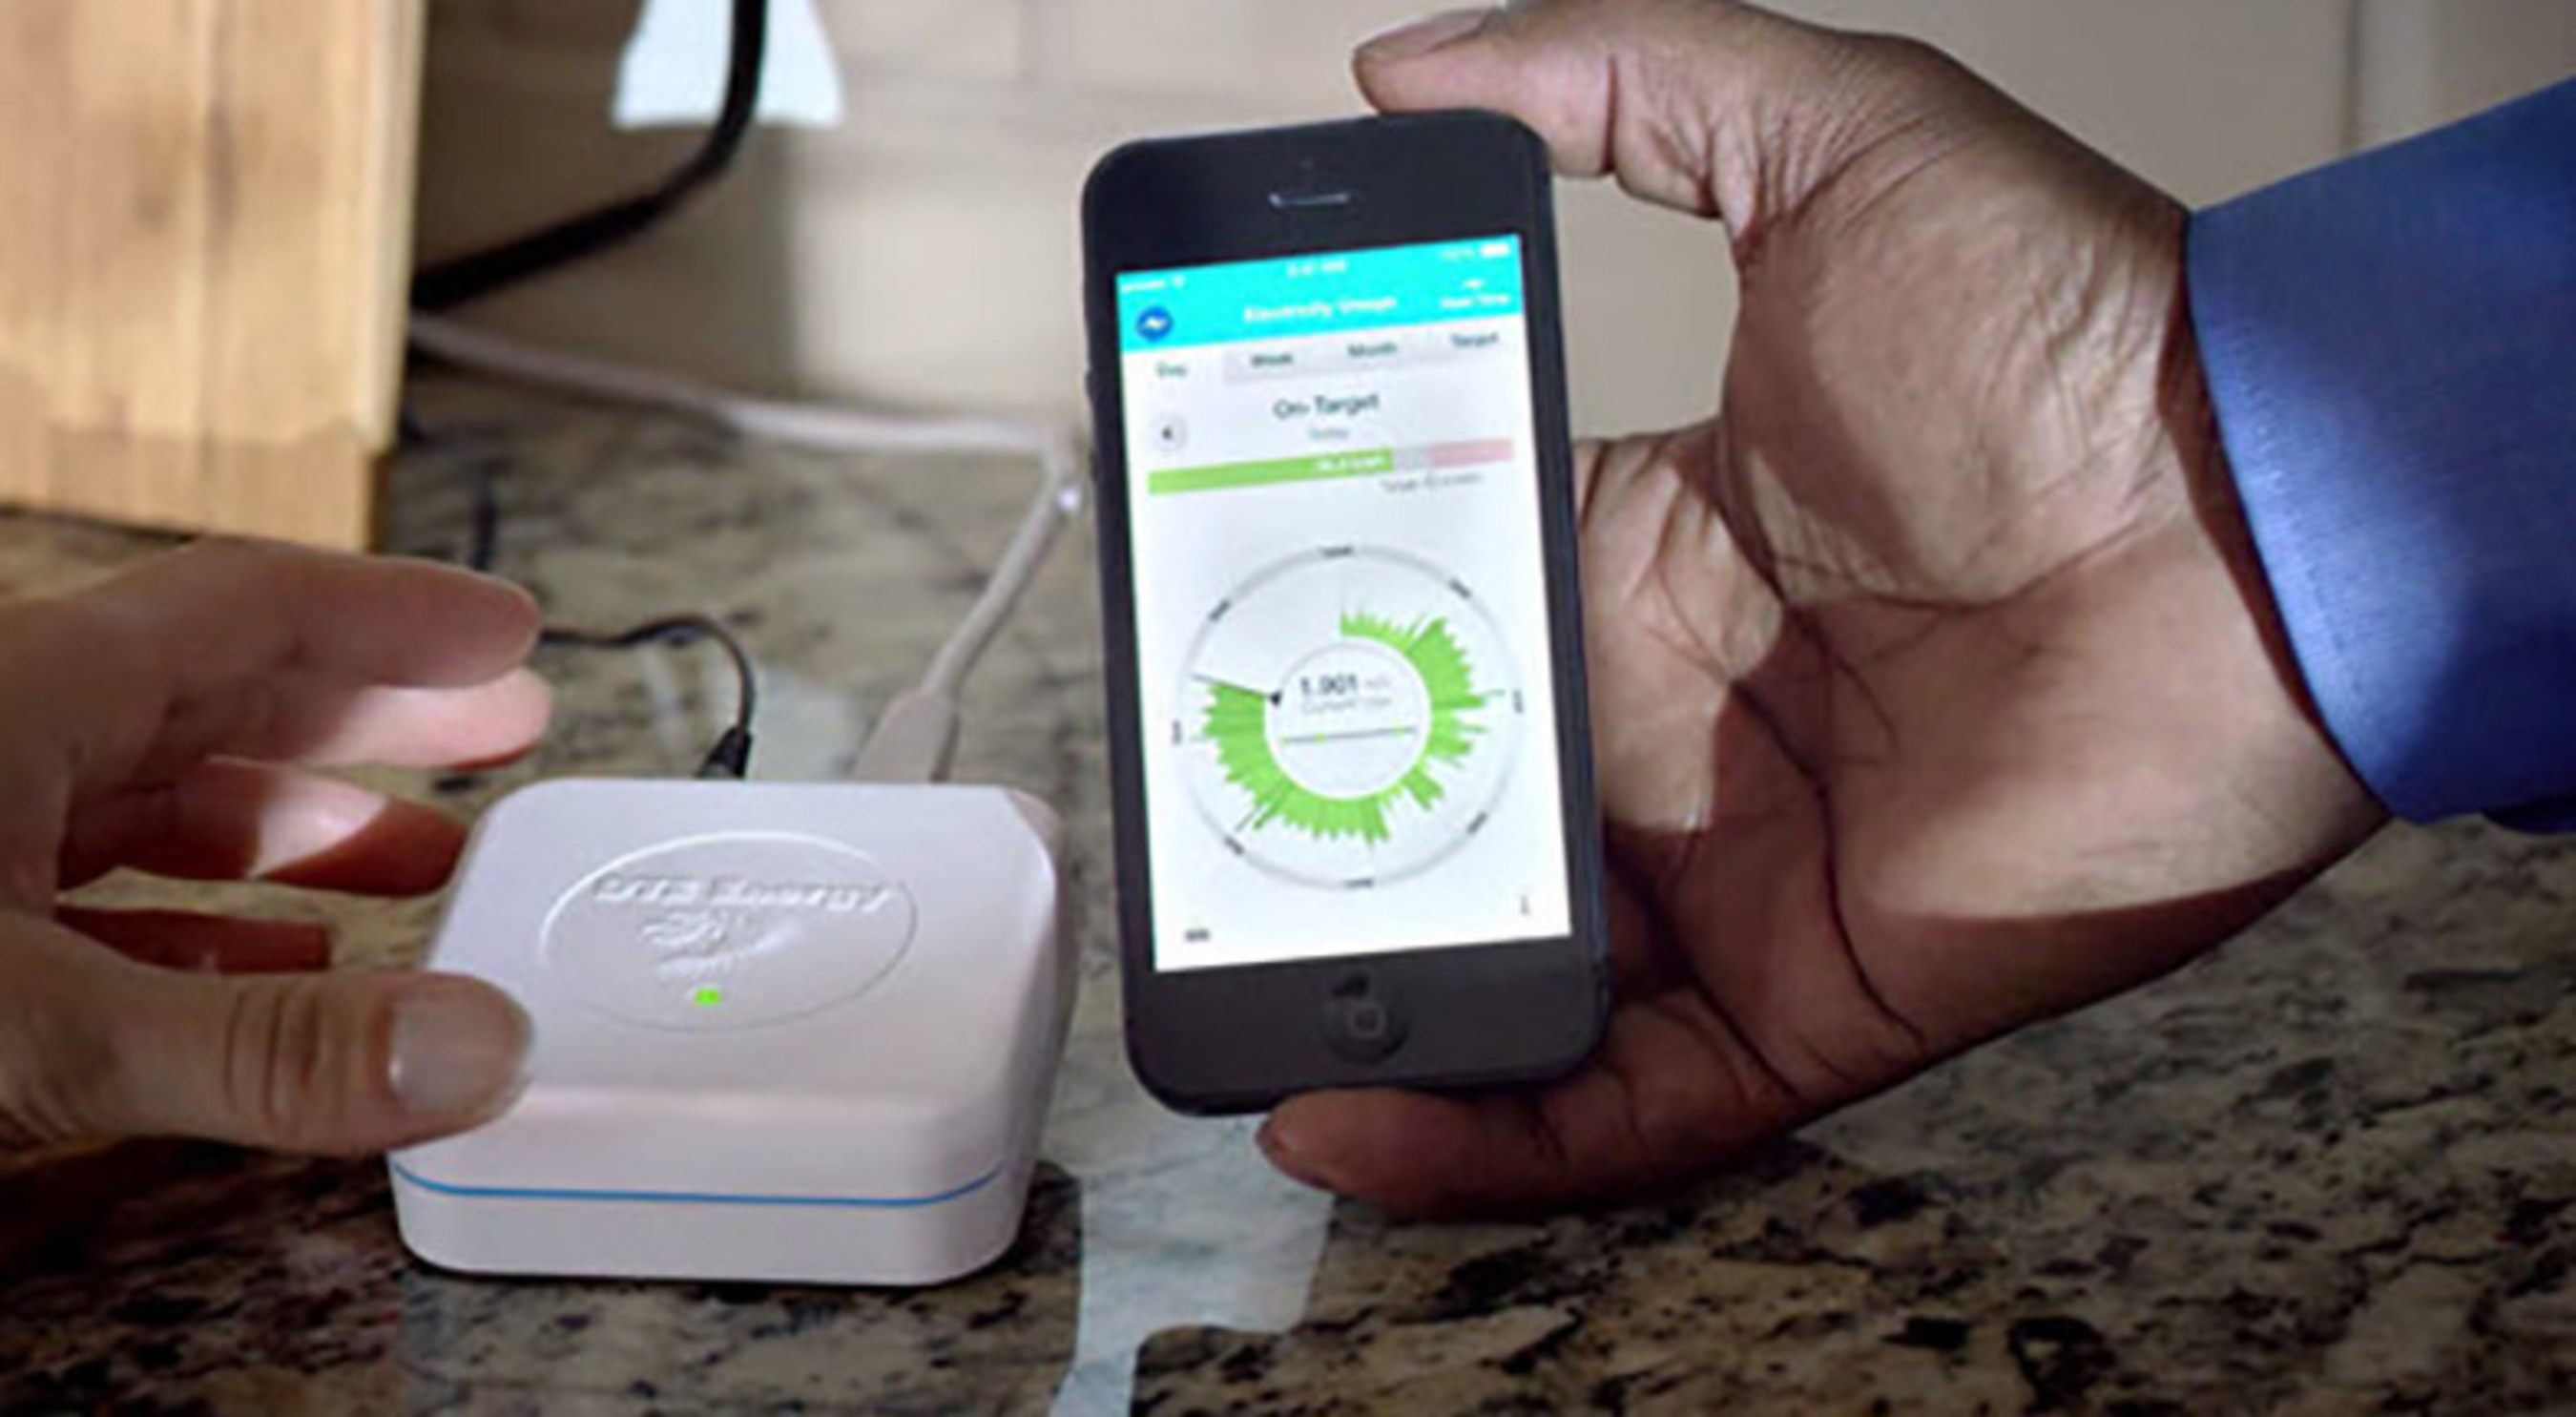 Dte Insight App Offers Customers New Ways To Save On Monthly Energy Bills